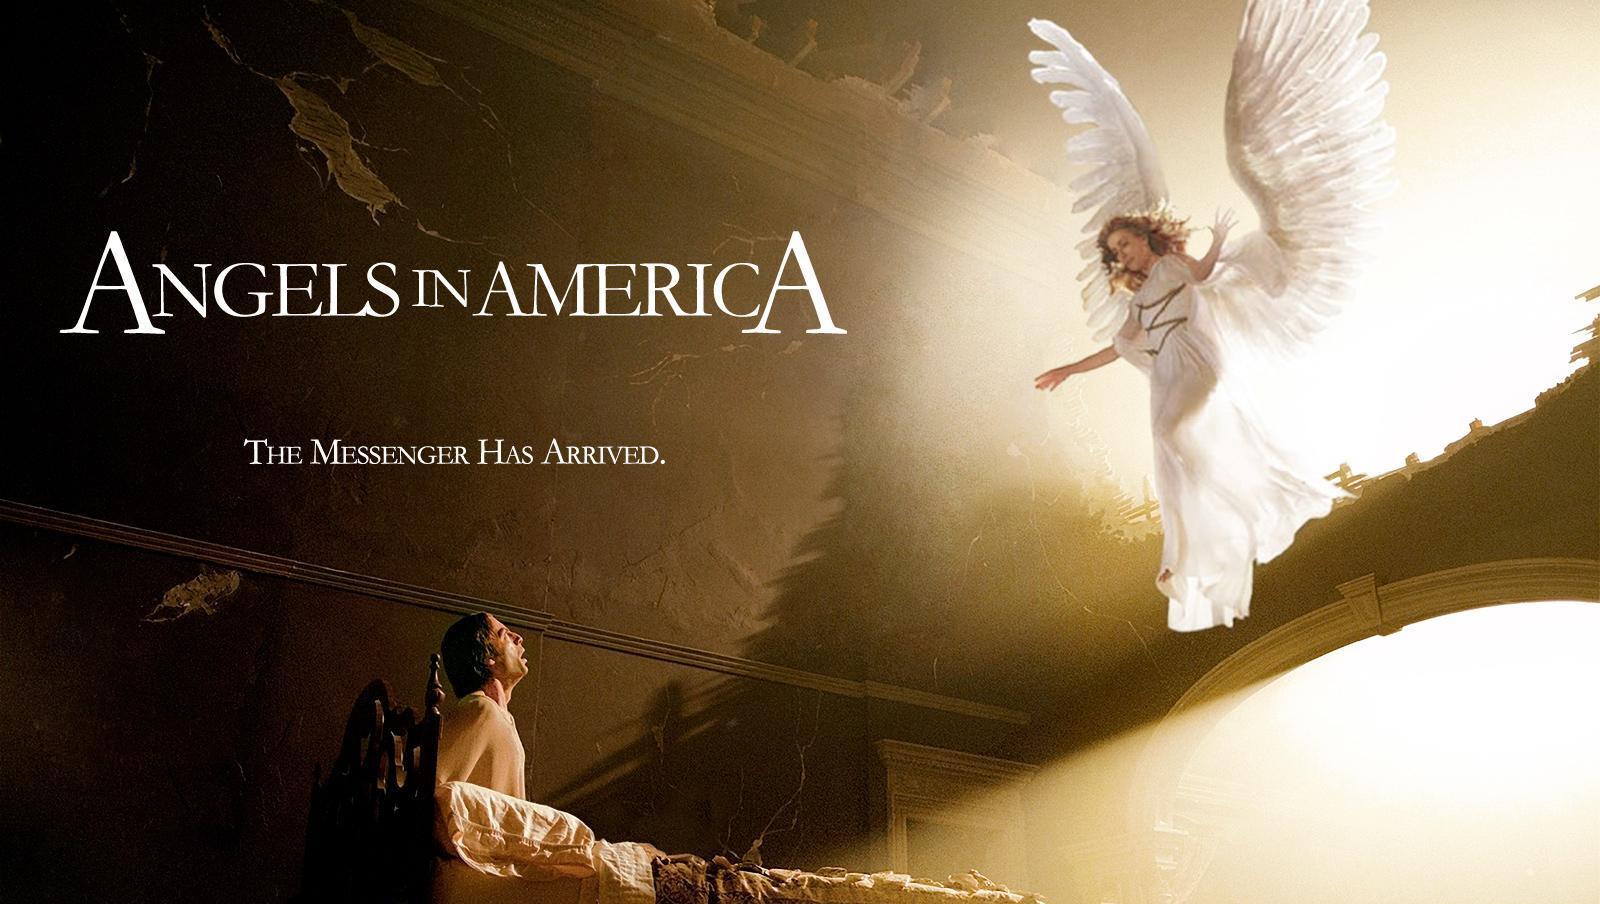 38-facts-about-the-movie-angels-in-america